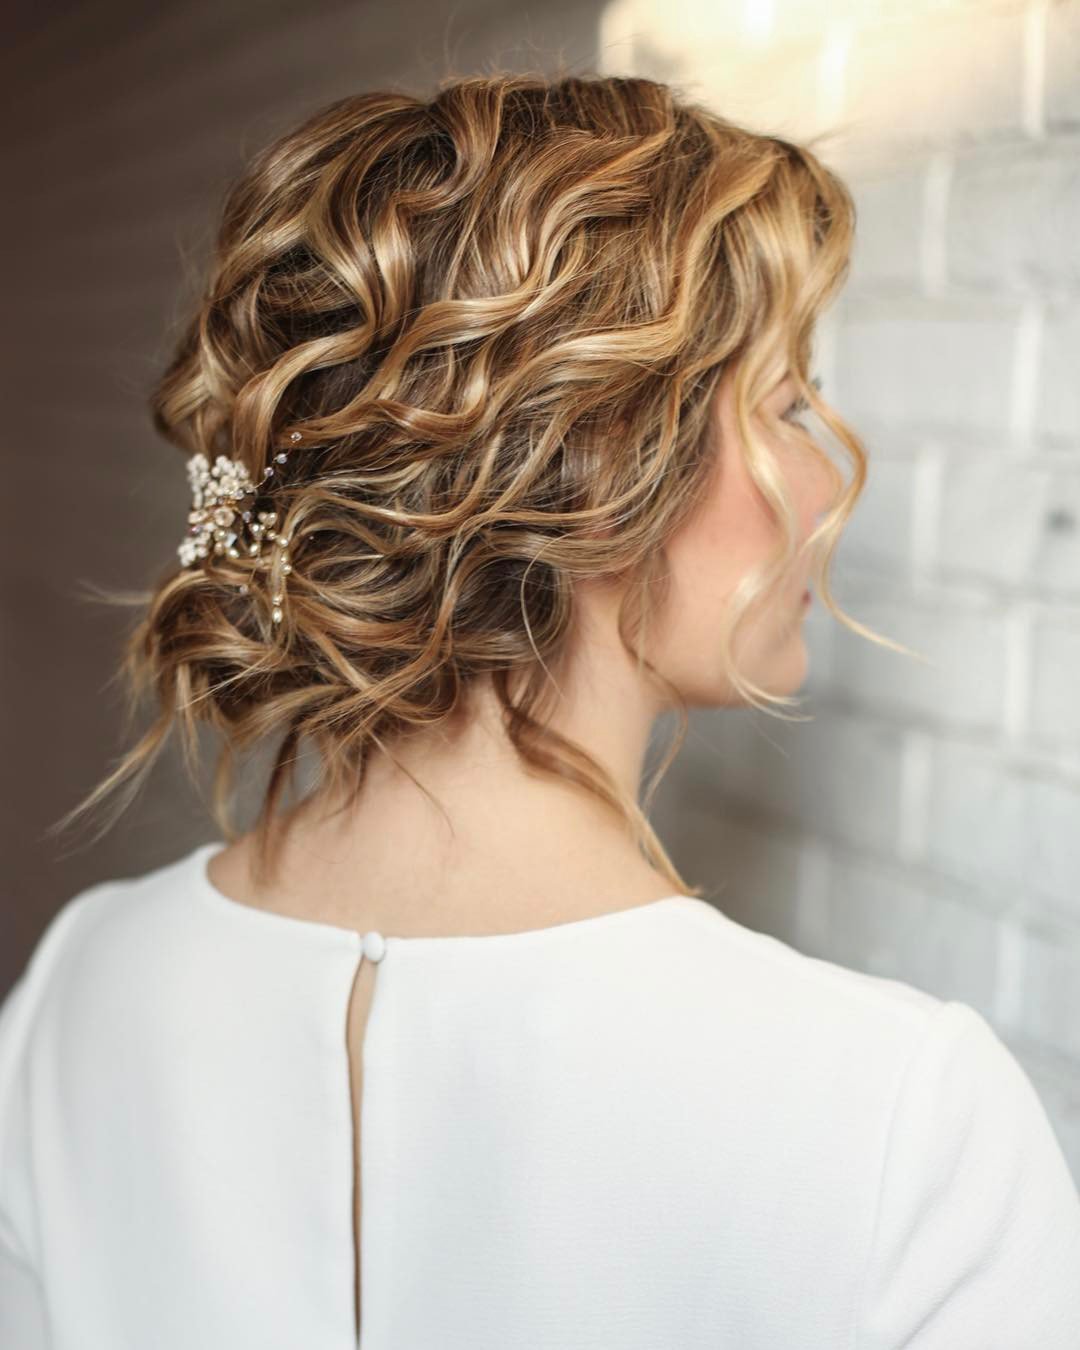 Wedding Hairstyles For Short Hair Textured Curly Low Updo Hi Miss Puff